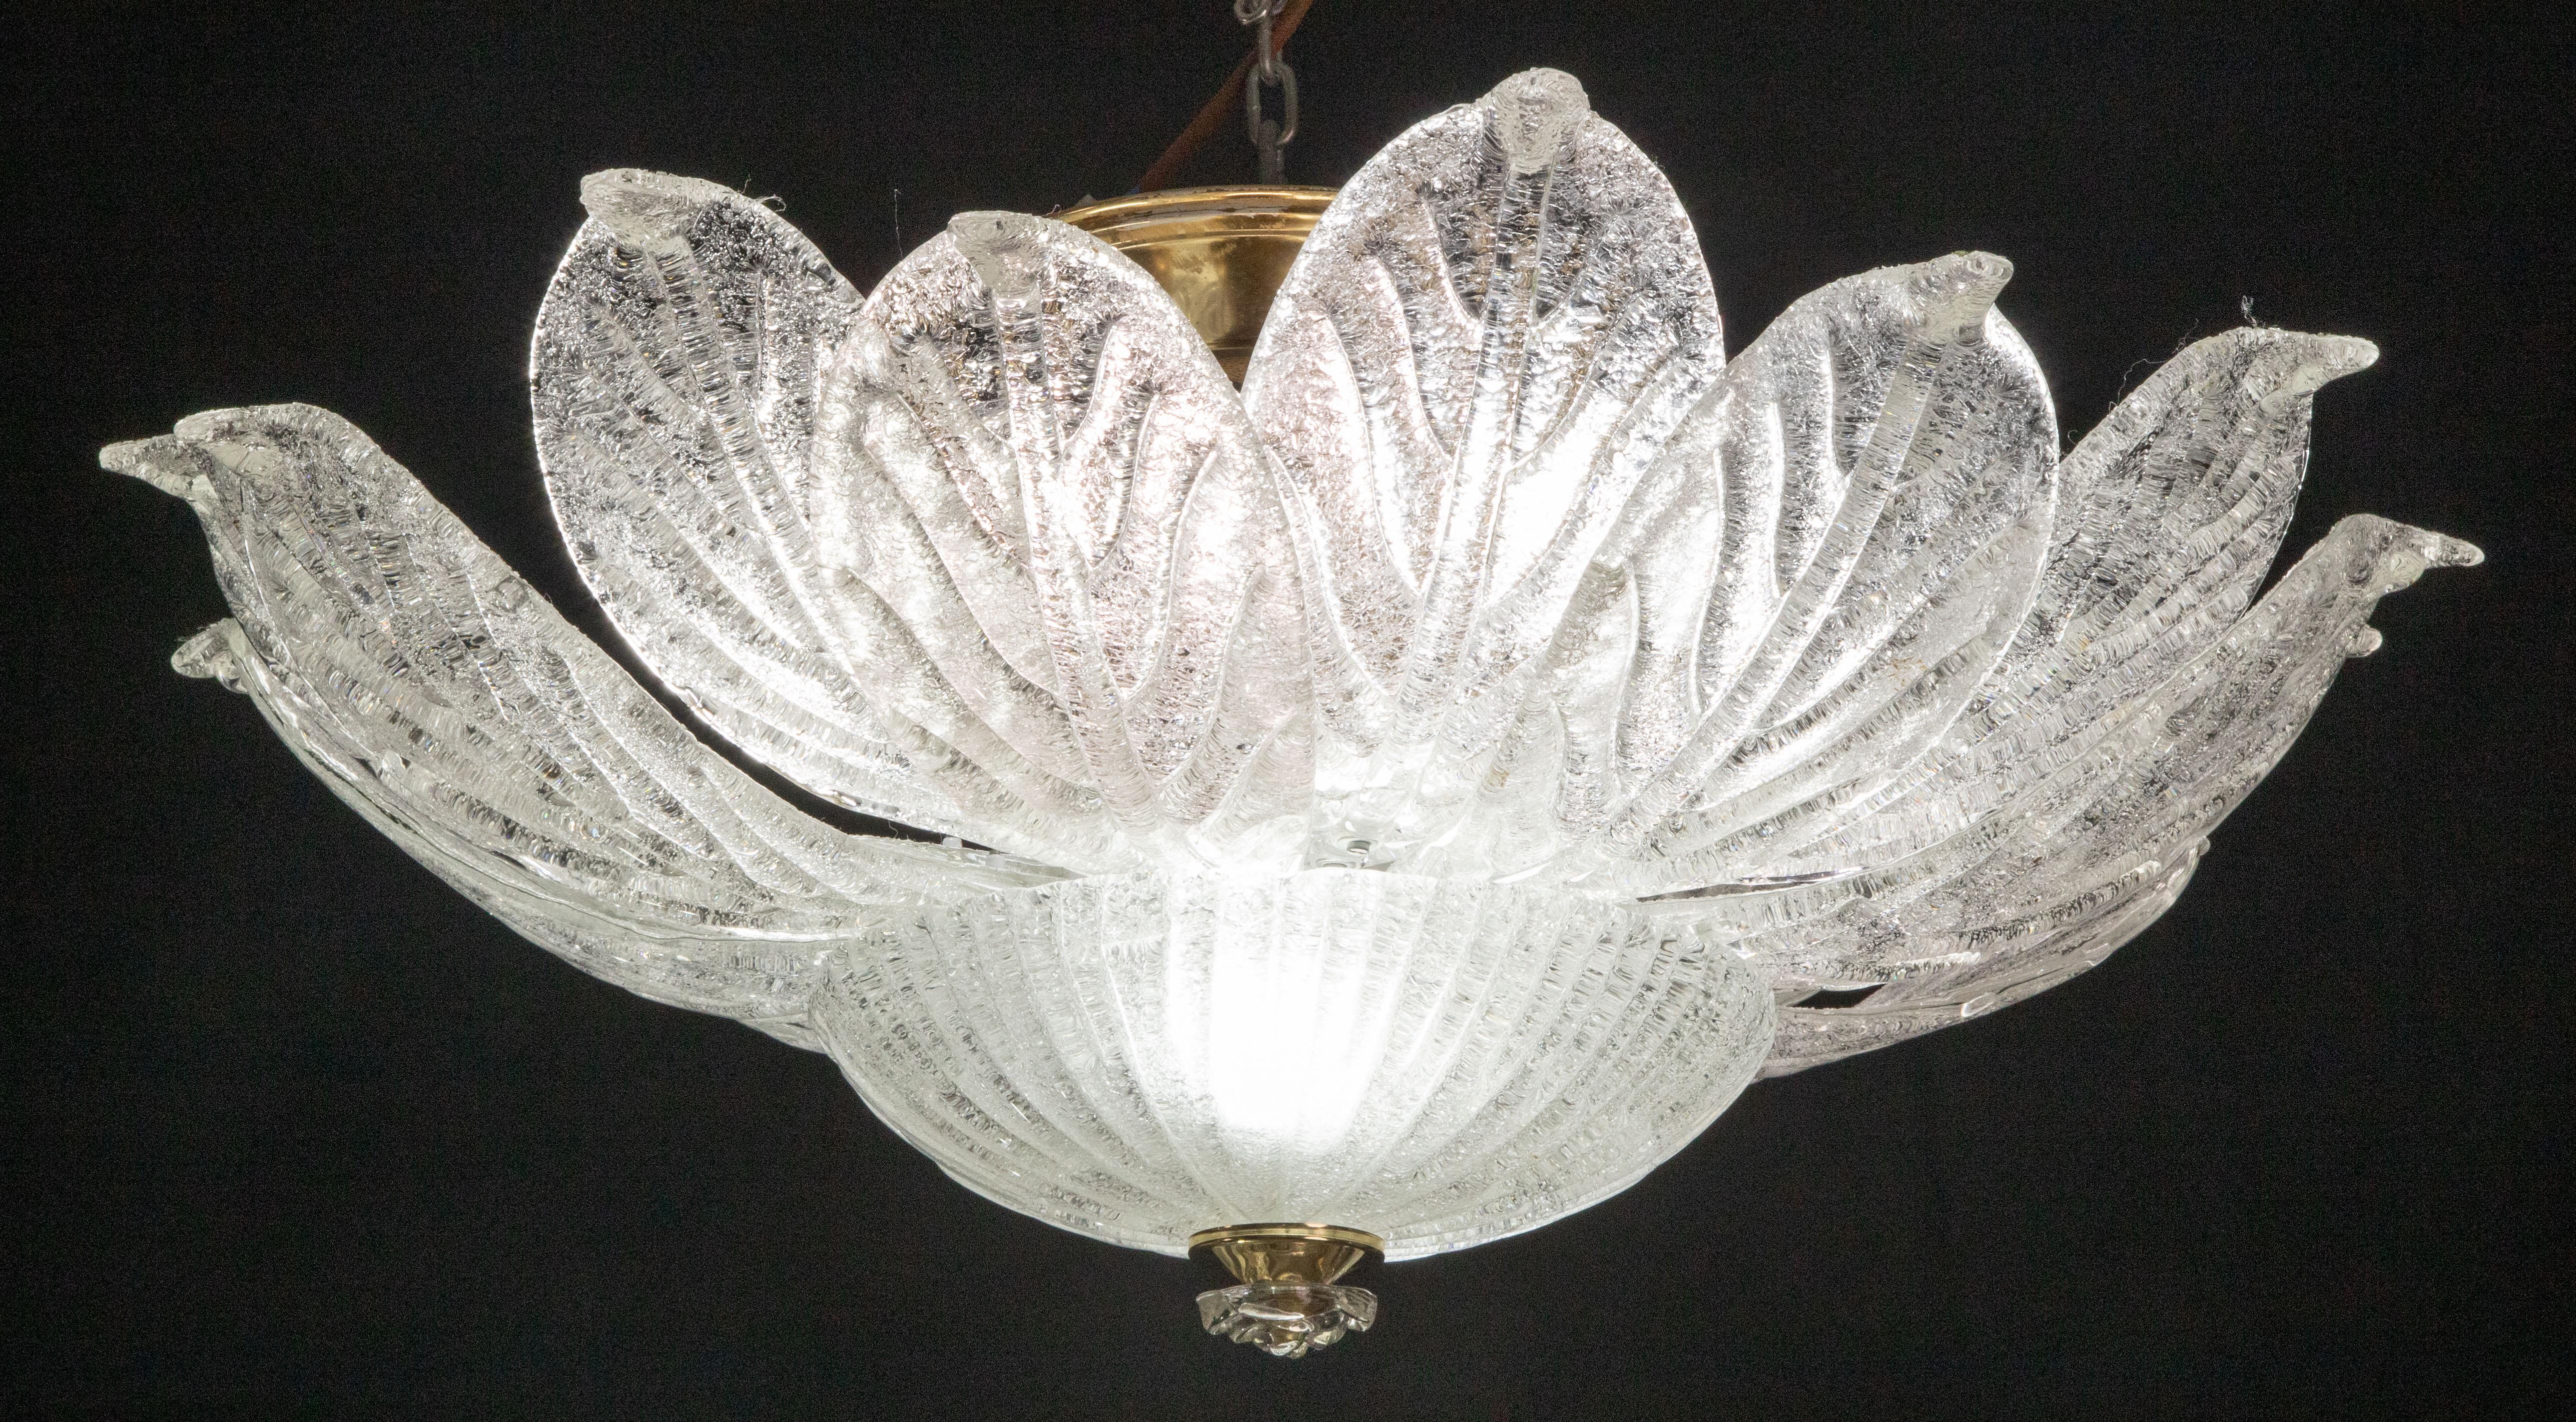 Splendid Murano glass ceiling lamp.

Period: circa 1970.

The light mounts 8 standard European e27 lamp holders plus 2 standard European e14 lamp holders

Perfect for decorating a large space.

Height measures 35 centimeters from the ceiling,